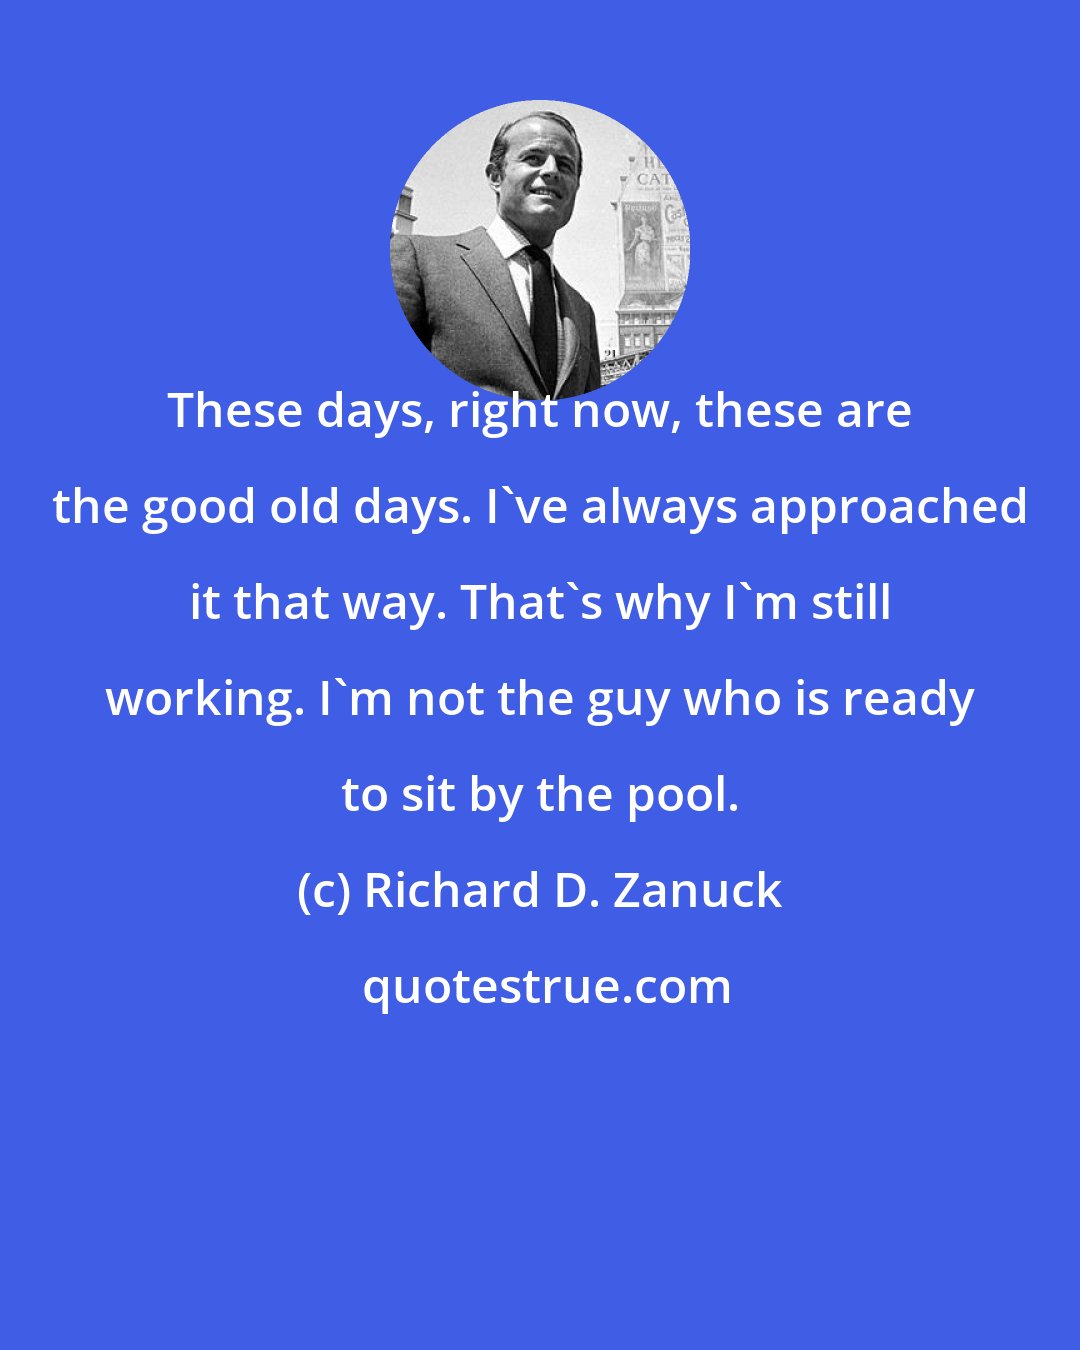 Richard D. Zanuck: These days, right now, these are the good old days. I've always approached it that way. That's why I'm still working. I'm not the guy who is ready to sit by the pool.